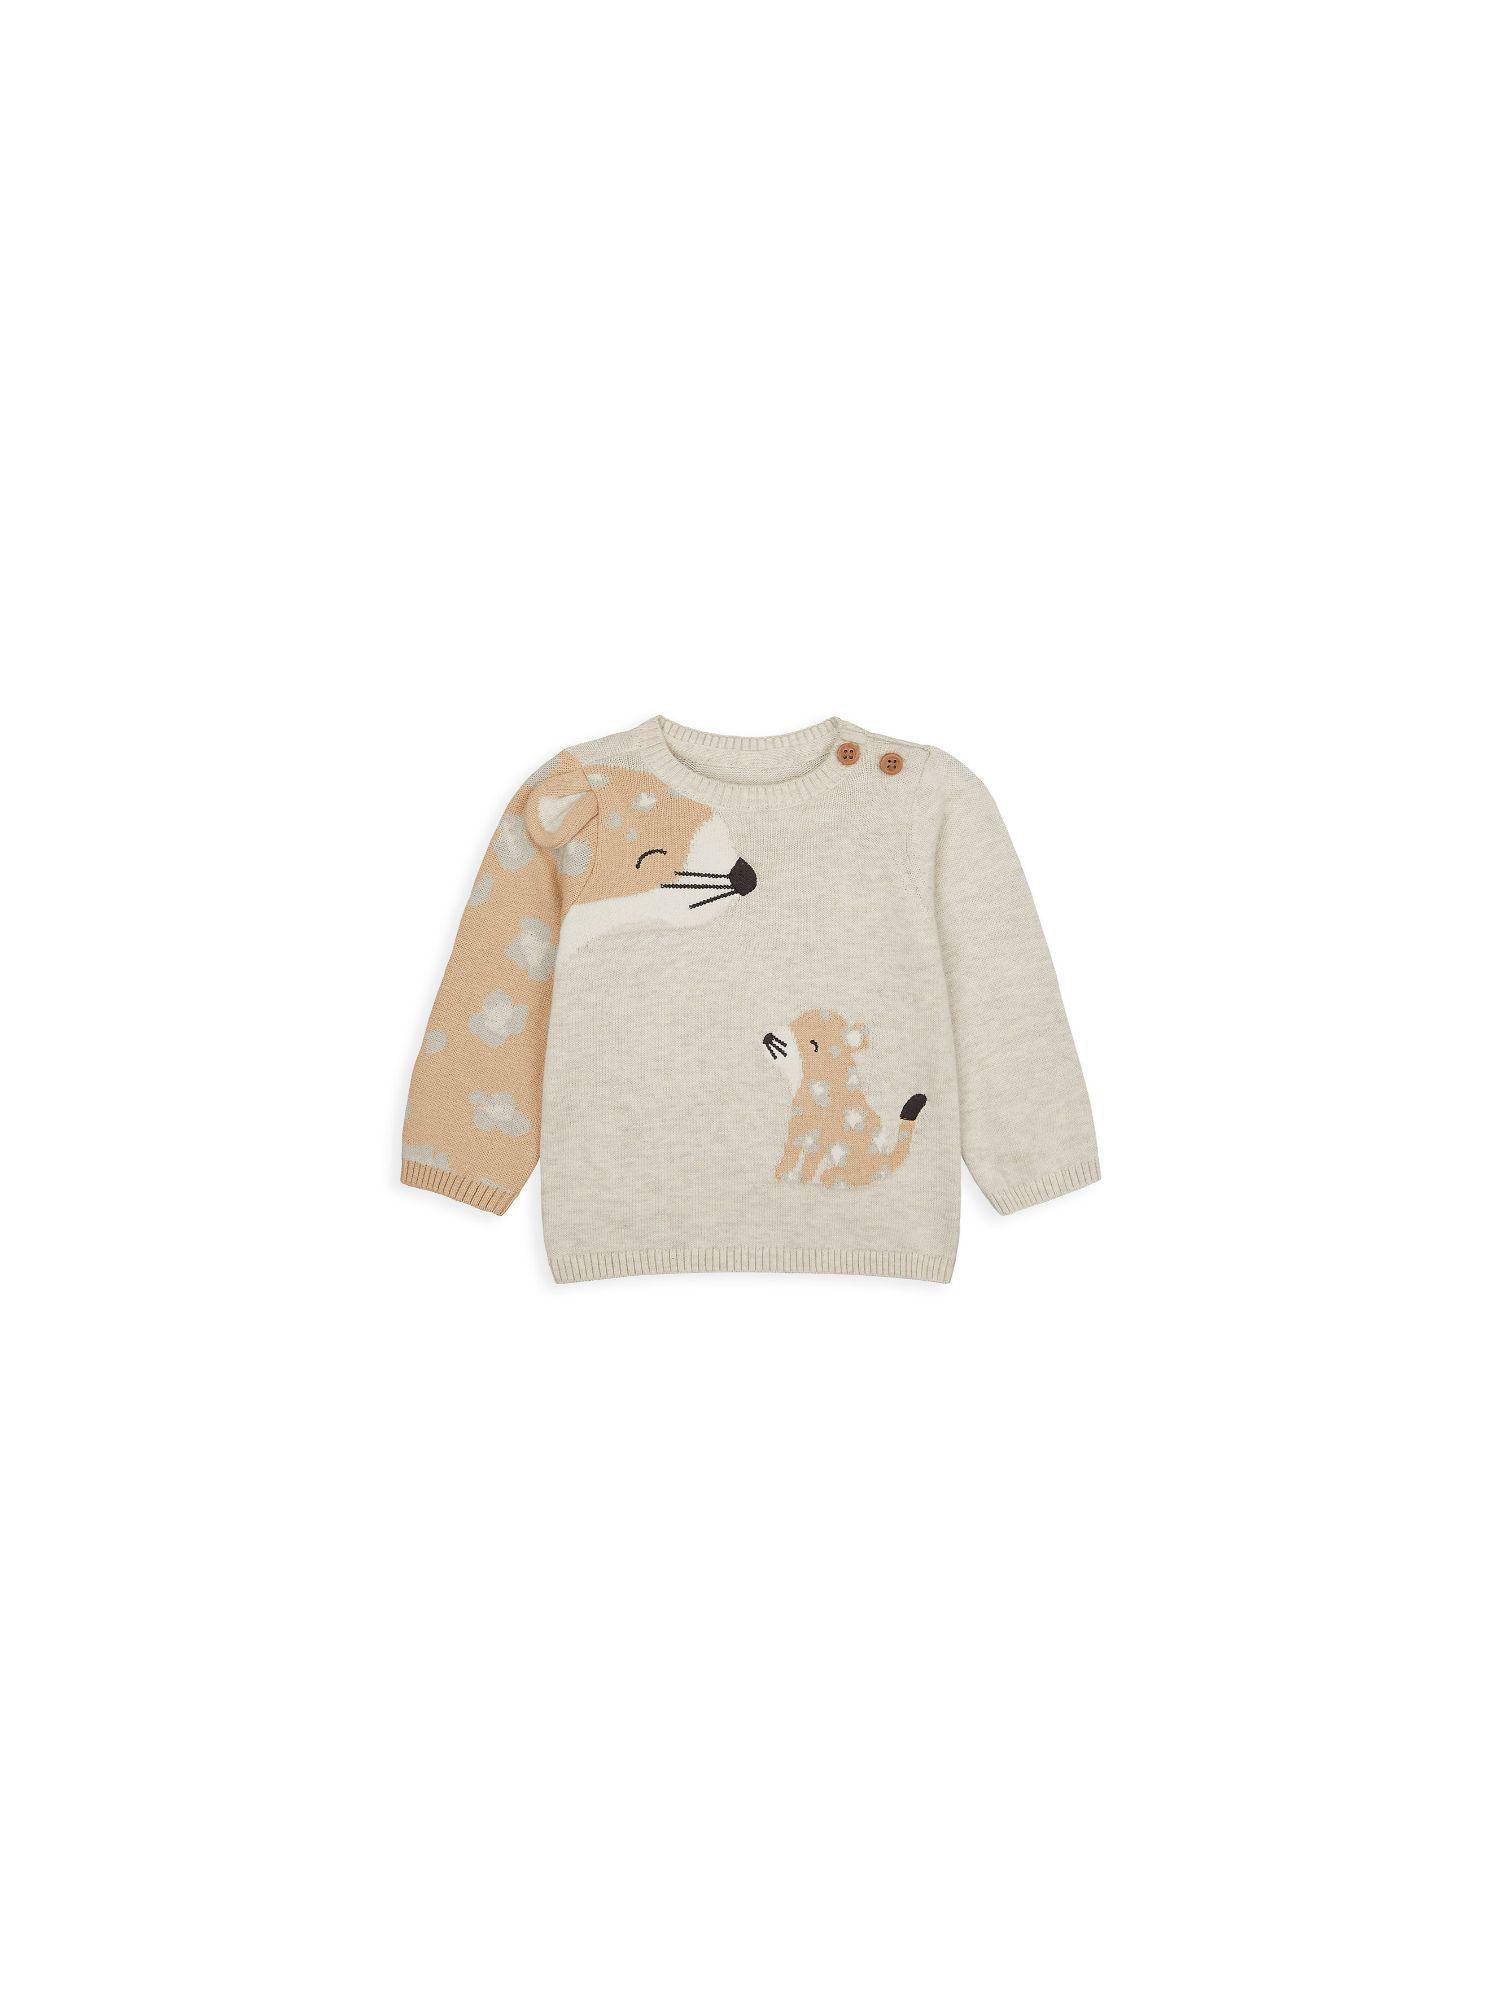 mother care nb mfu leopard knit sweater